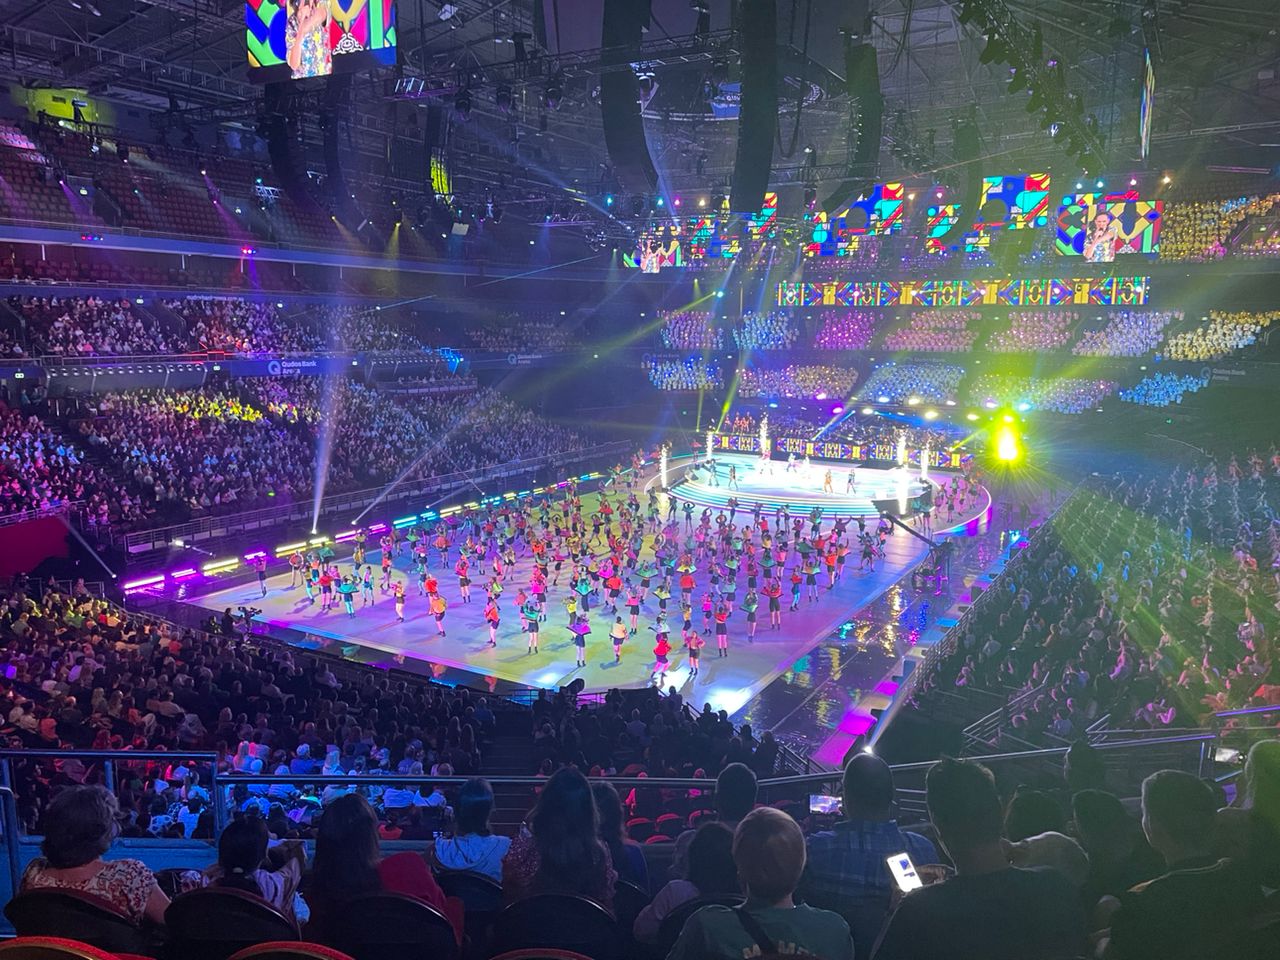 A colourful performance at the 2022 Schools Spectacular event presented by the NSW Department of Education